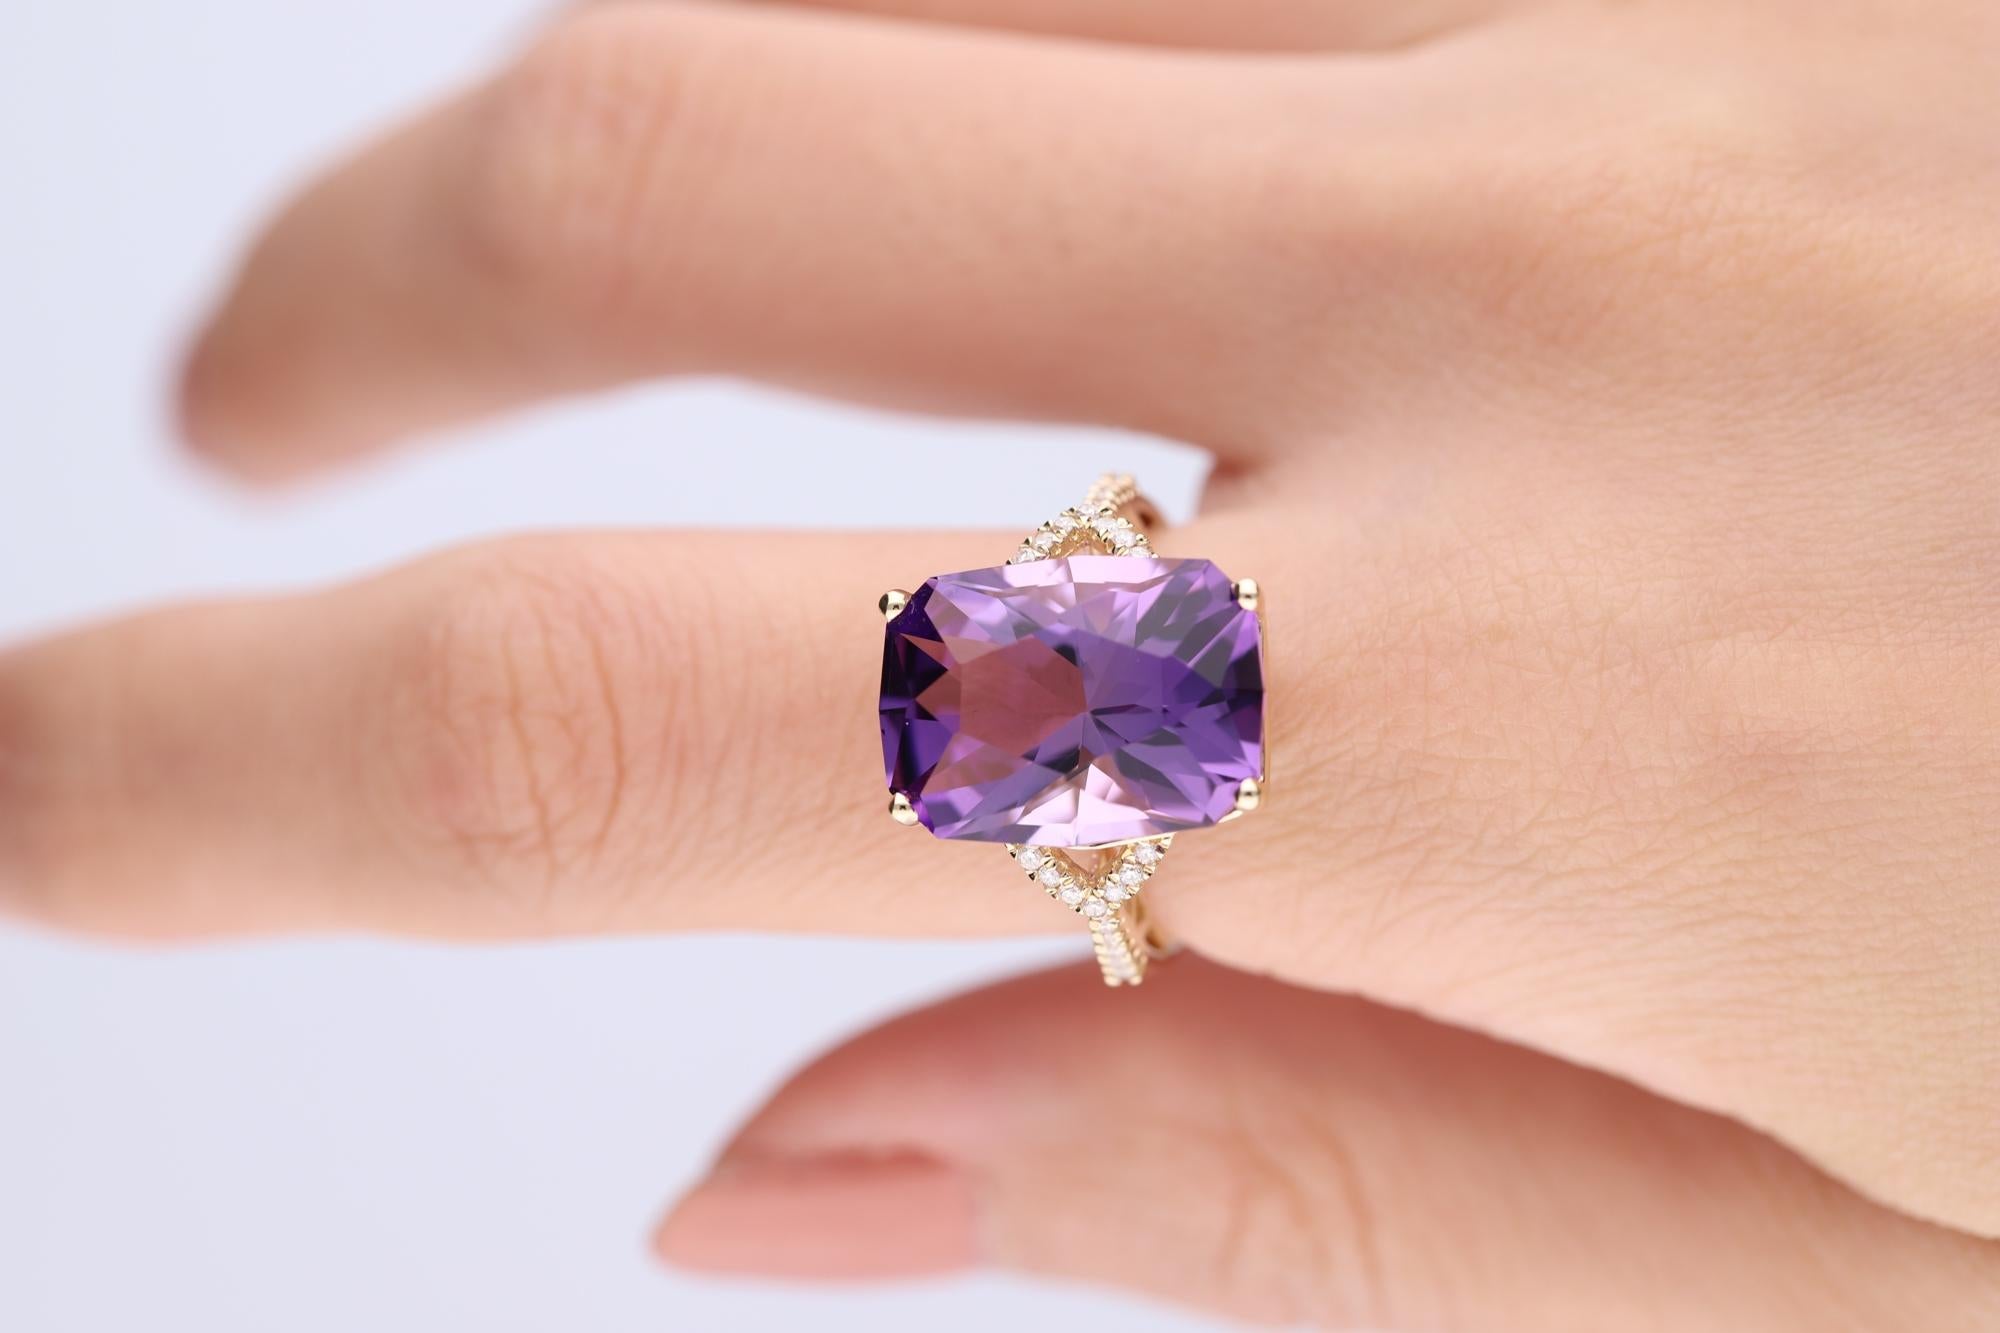 Decorate yourself in elegance with this Ring is crafted from 14-karat Yellow Gold by Gin & Grace Earring. This Ring is made up of Cushion-cut (1 pcs) 11.85 carat Amethyst and Round-cut White Diamond (26 pcs) 0.13 carat. This Ring is weight 3.65